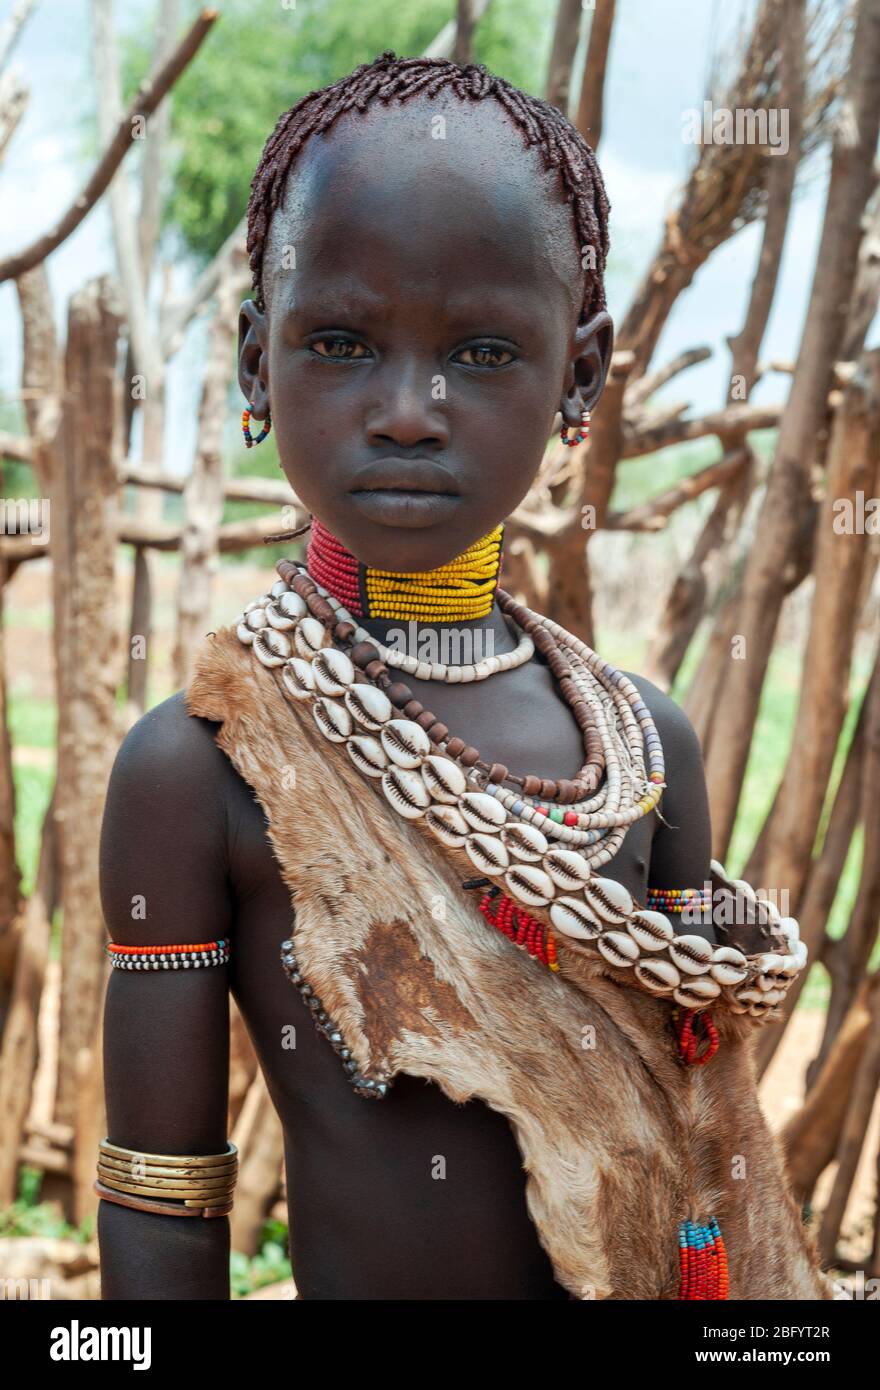 Omo Valley - Ethiopia - Africa, January 2nd, 2013: Young unidentified girl of the Hamer Tribe standing portrait with traditionall ornaments In Omo Val Stock Photo